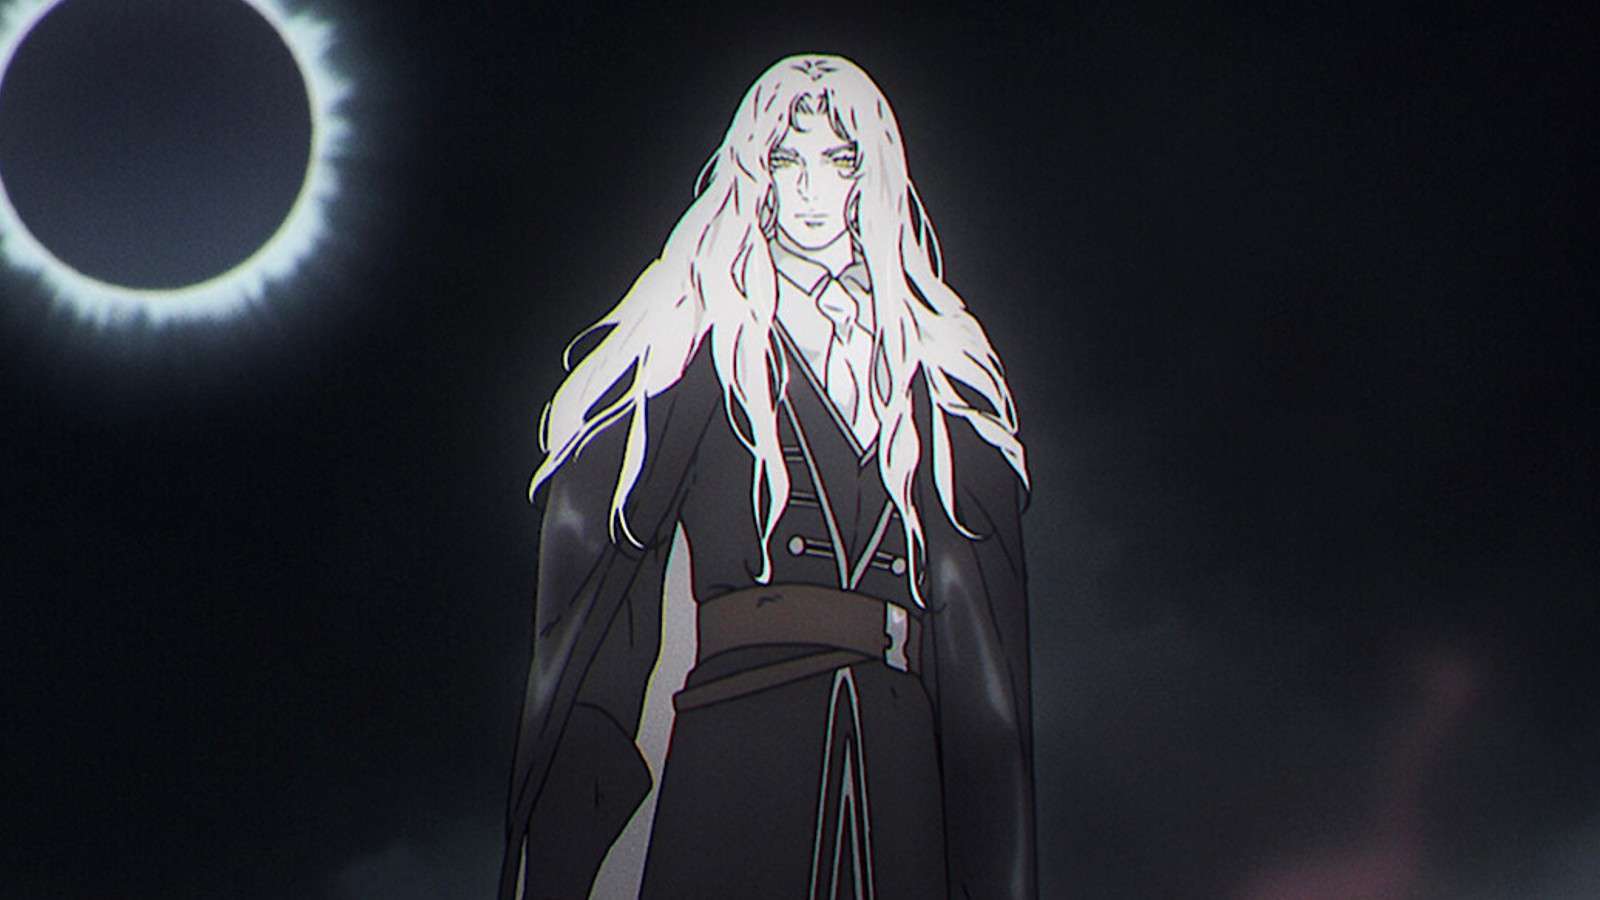 Alucard at the end of Castlevania: Nocturne